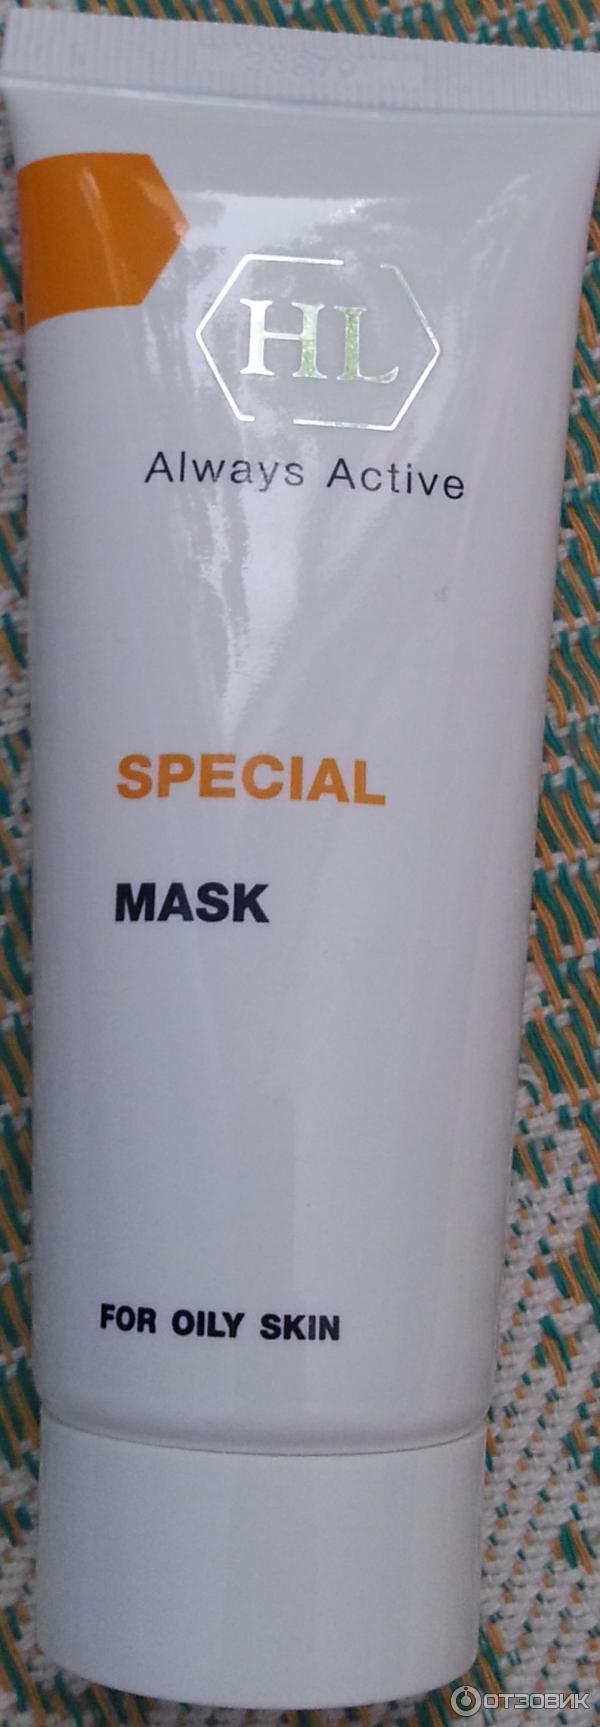   Holy Land Special Mask for oily skin 